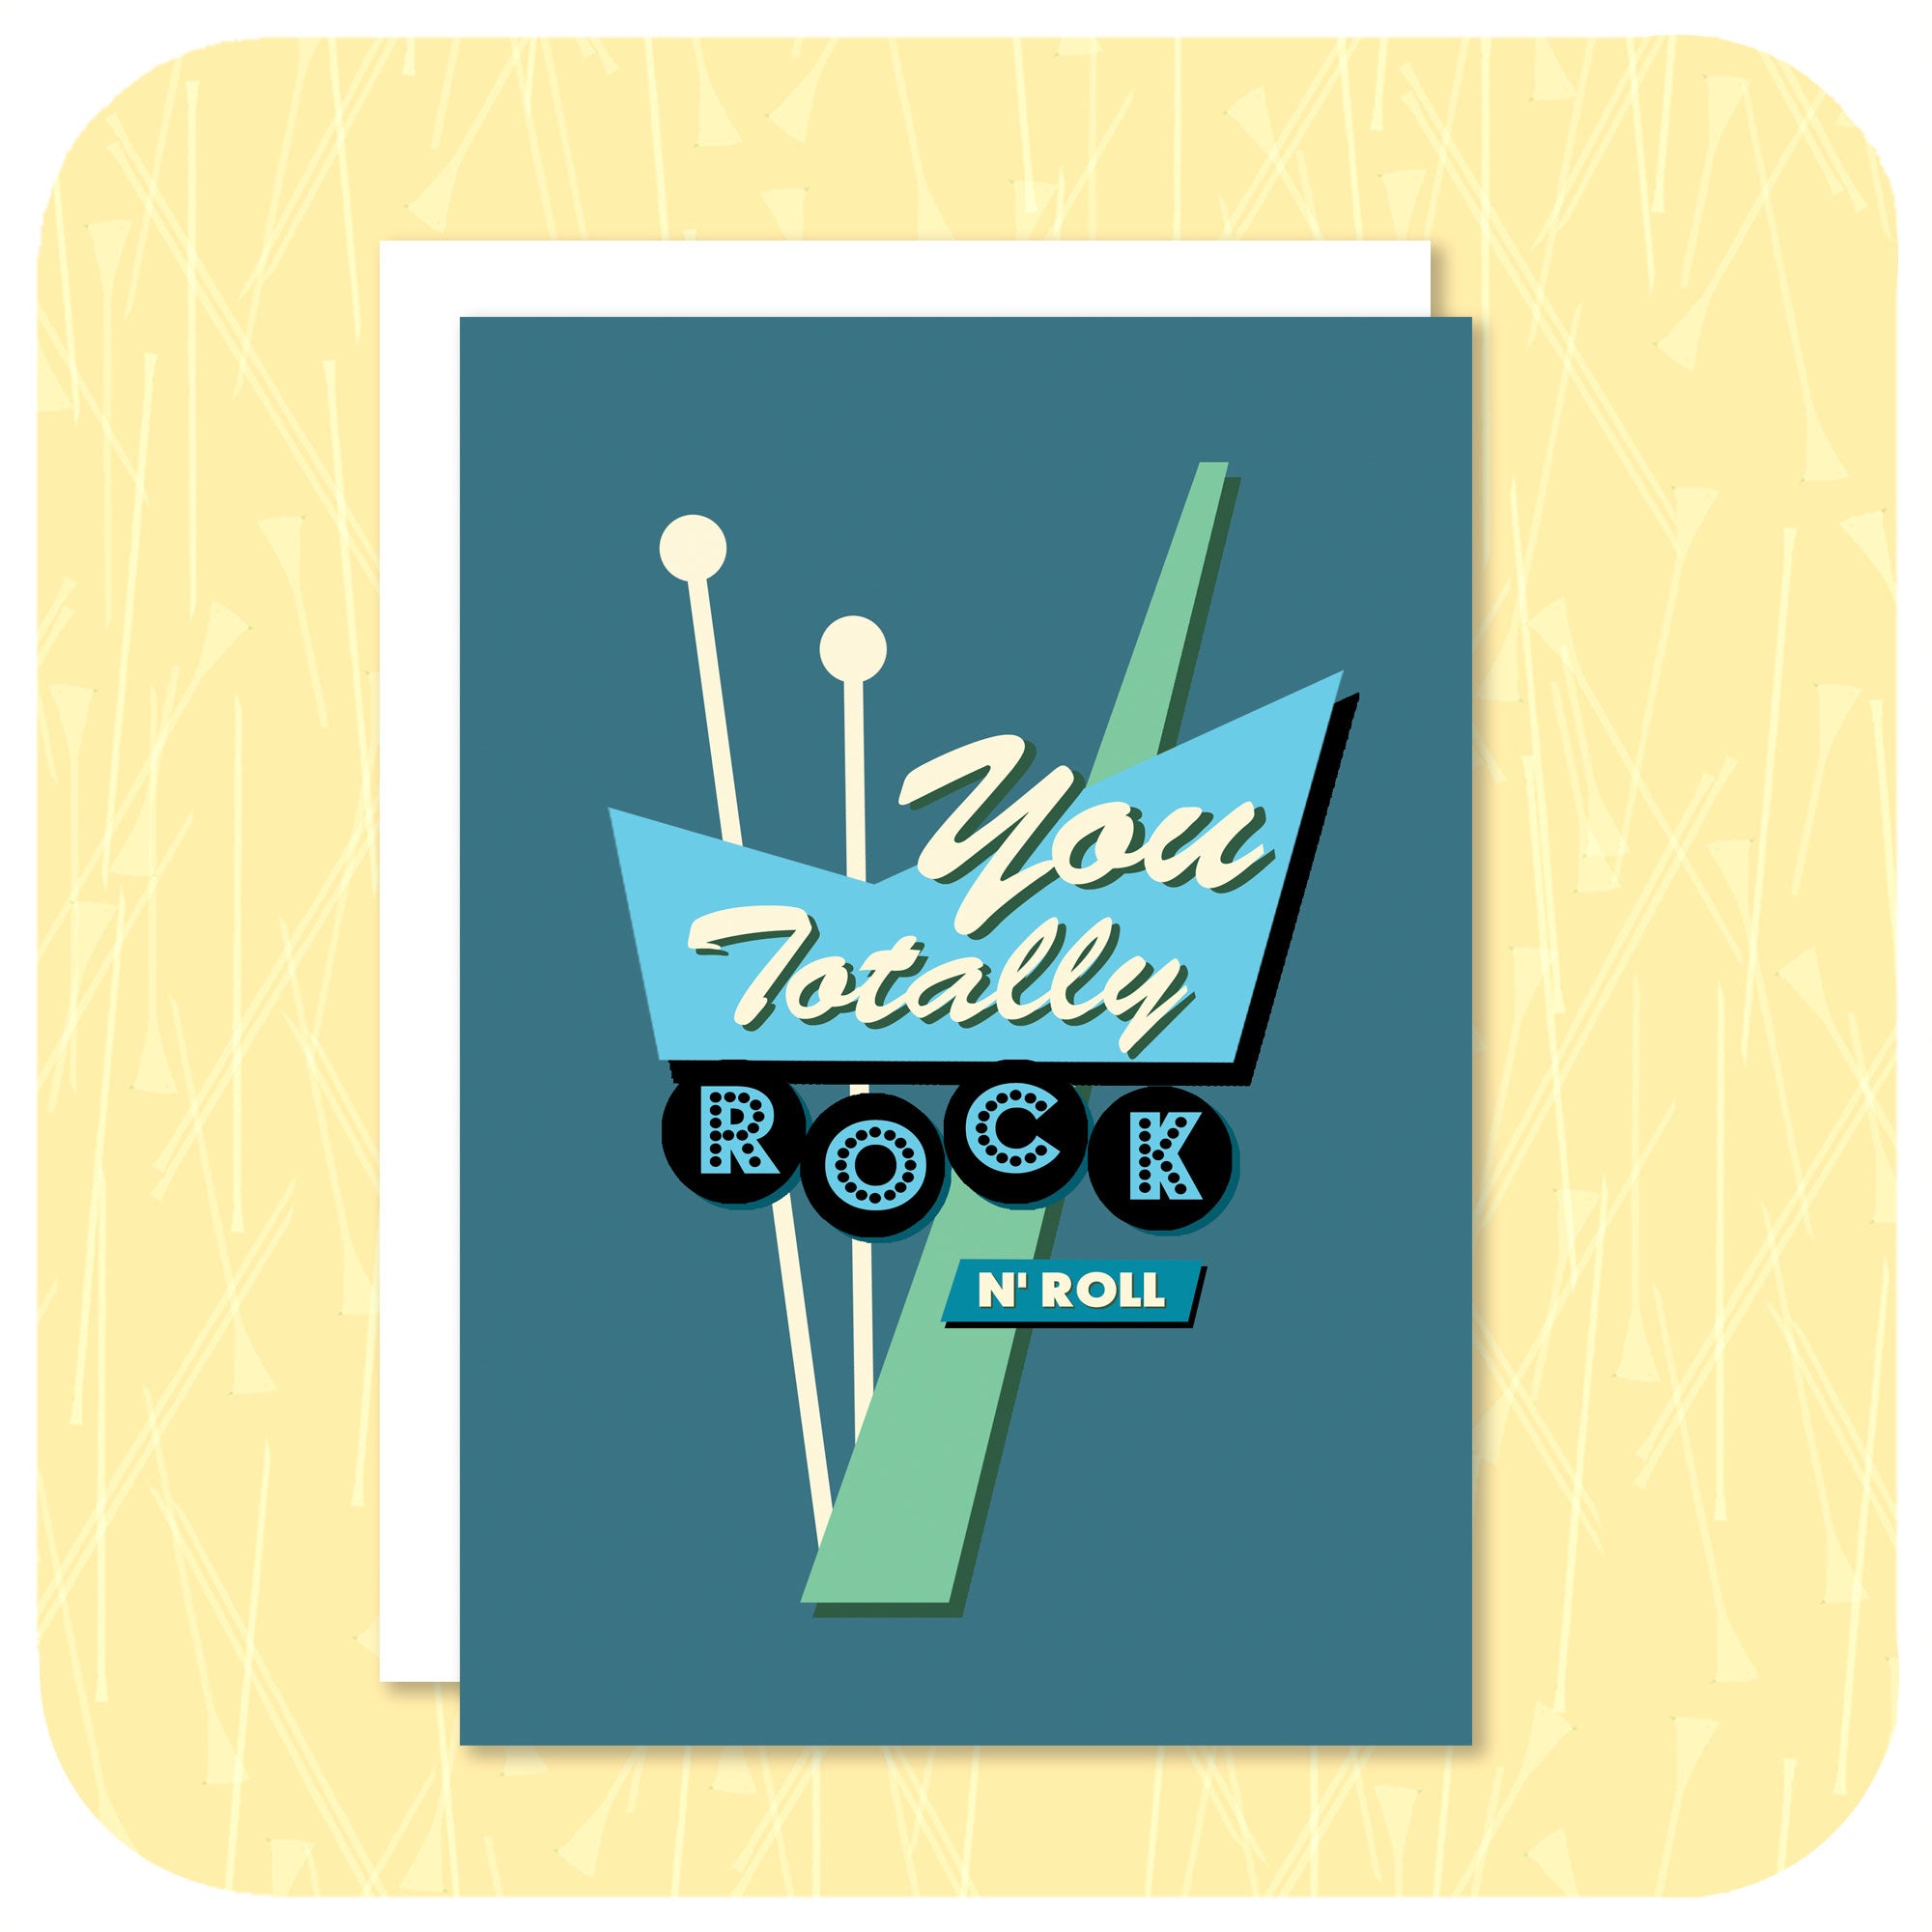 An A6 greetings card featuring a graphic rendering of a 50s style American roadside neon sign in blues and greens, with the words "You Totally Rock n Roll" sits on a white envelope against a light yellow textured background | The Inkabilly Emporium